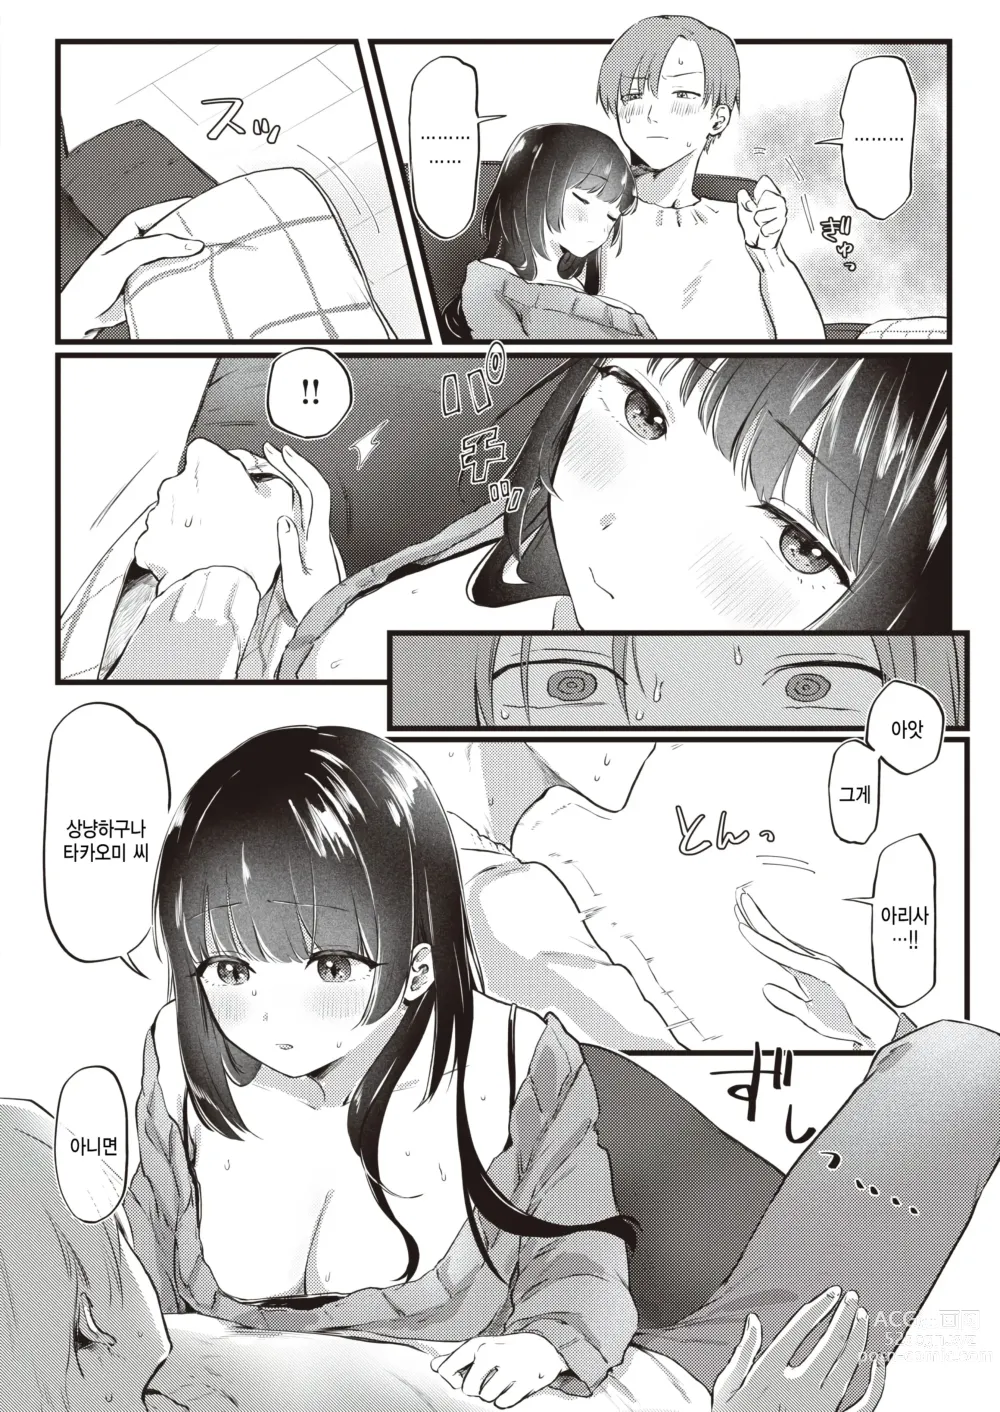 Page 6 of manga Arisa no Omoidouri - Only with me for life